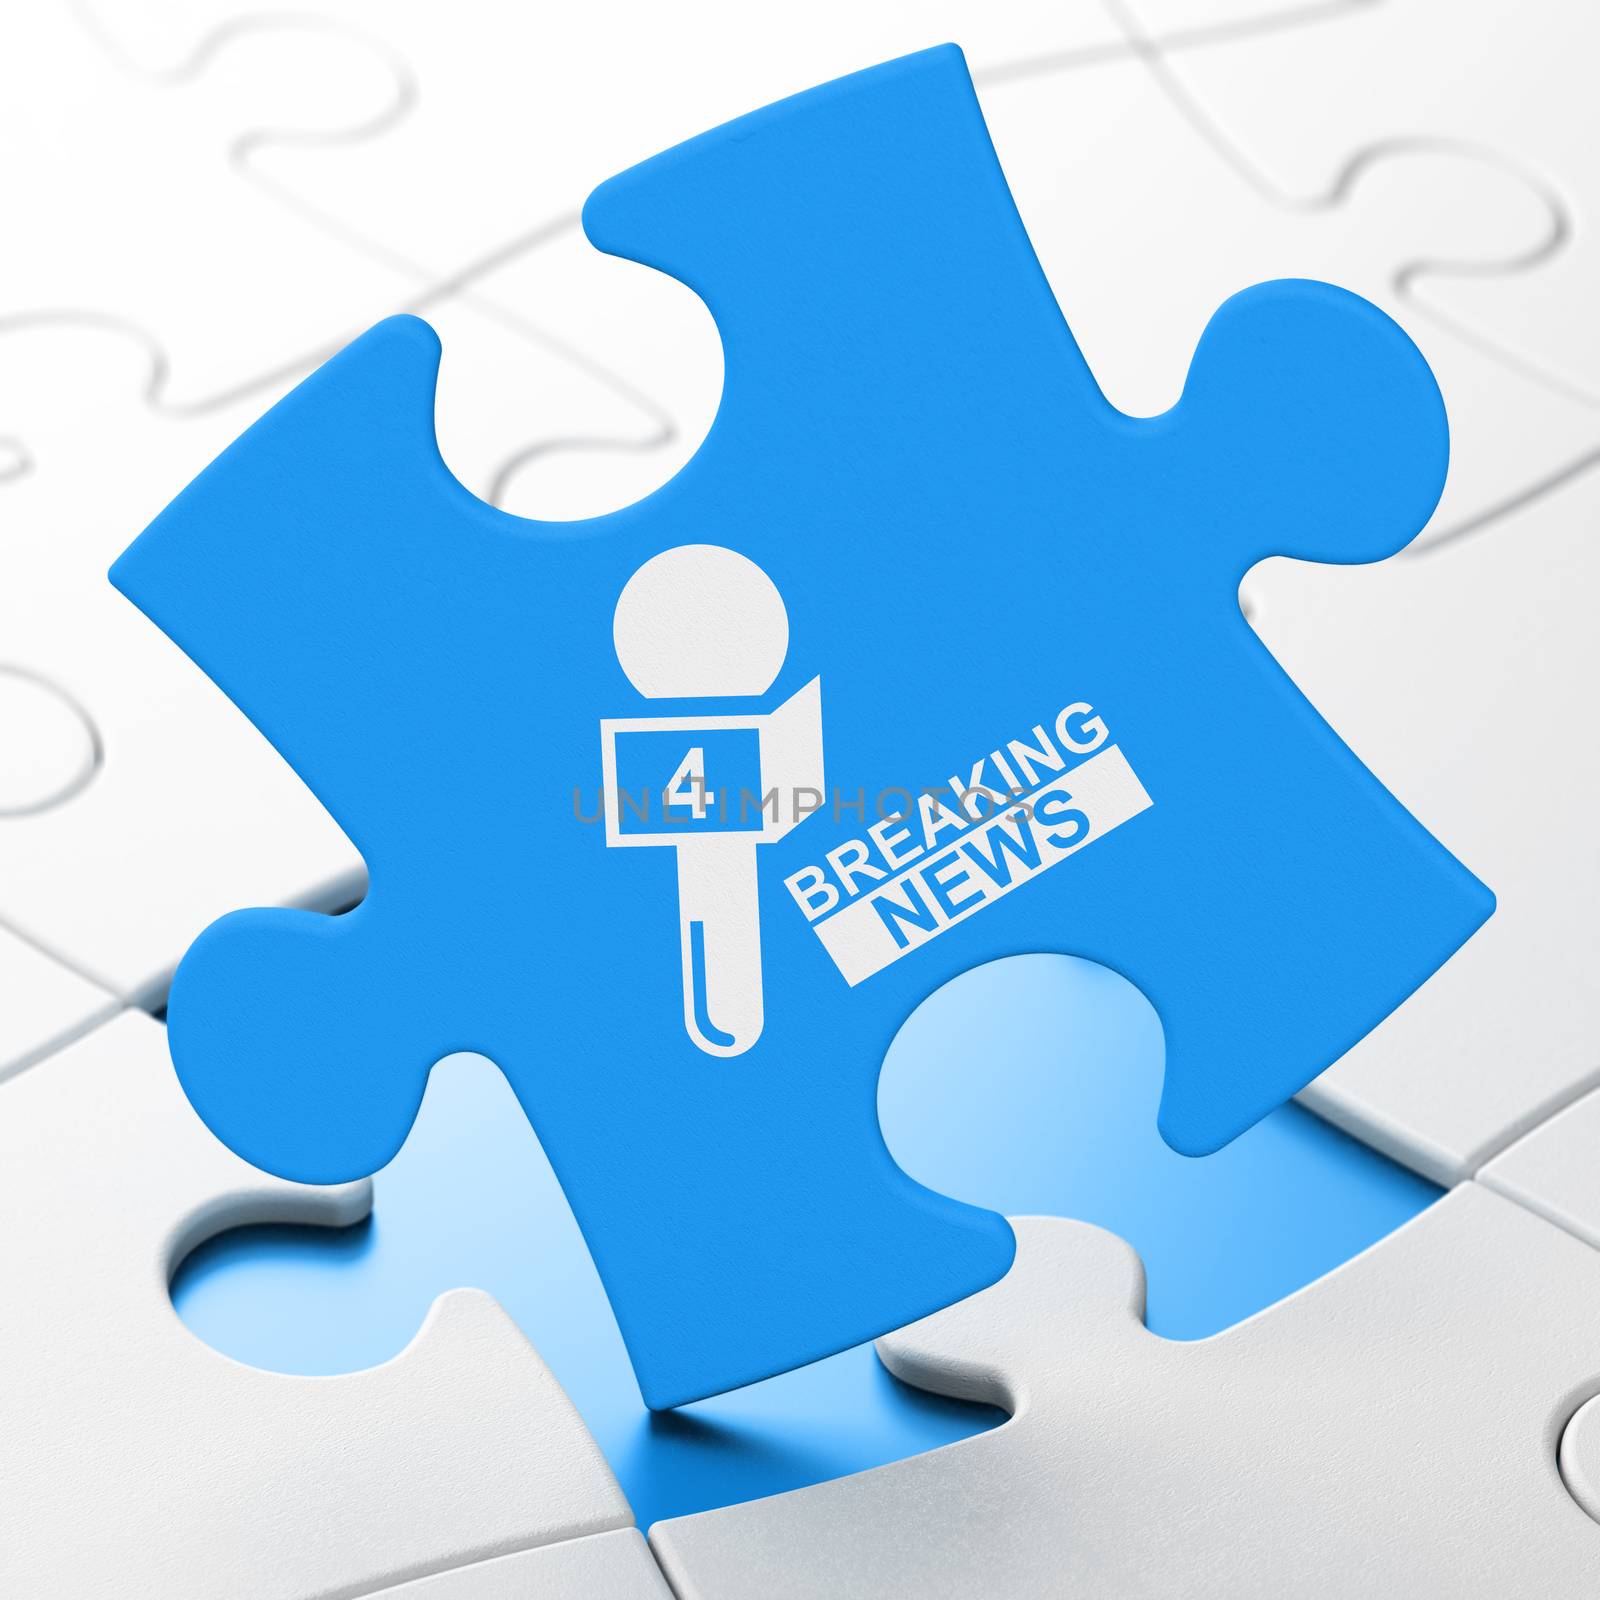 News concept: Breaking News And Microphone on Blue puzzle pieces background, 3D rendering